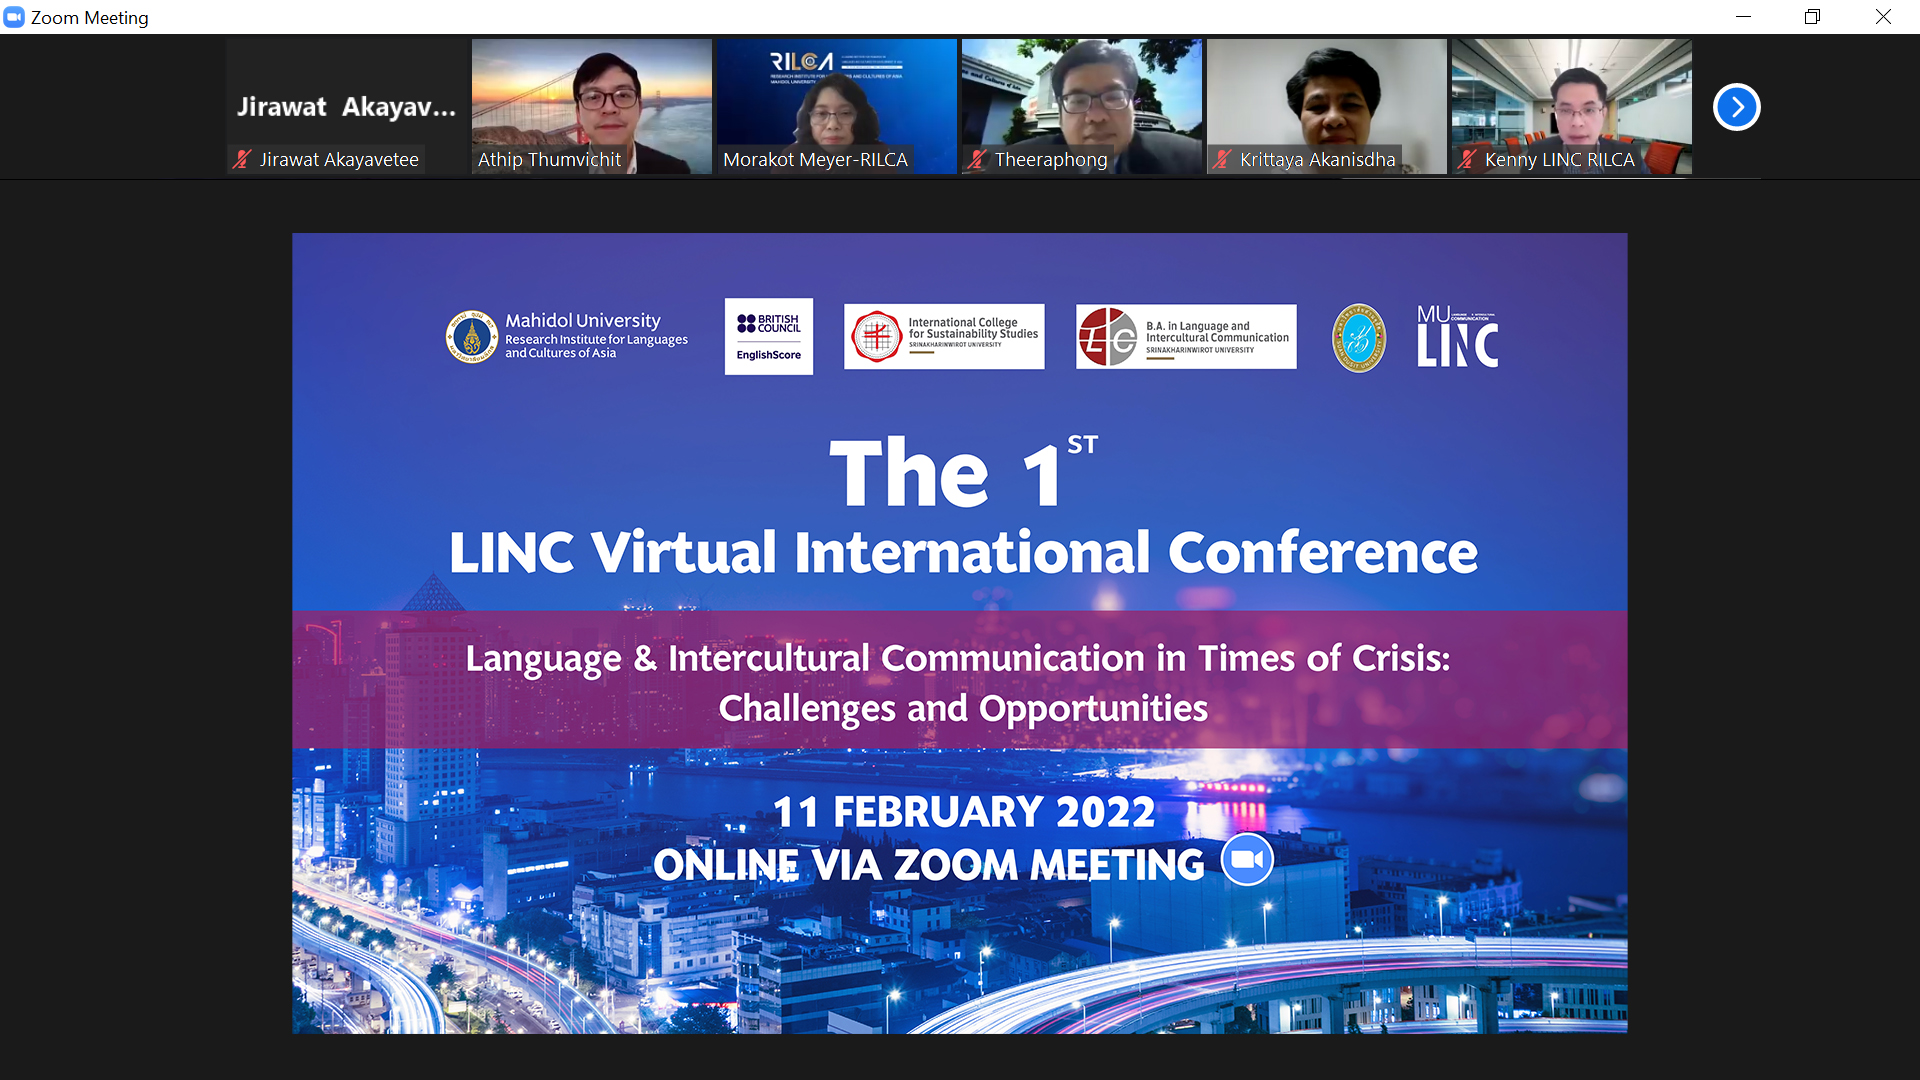 The 1st LINC Virtual International Conference